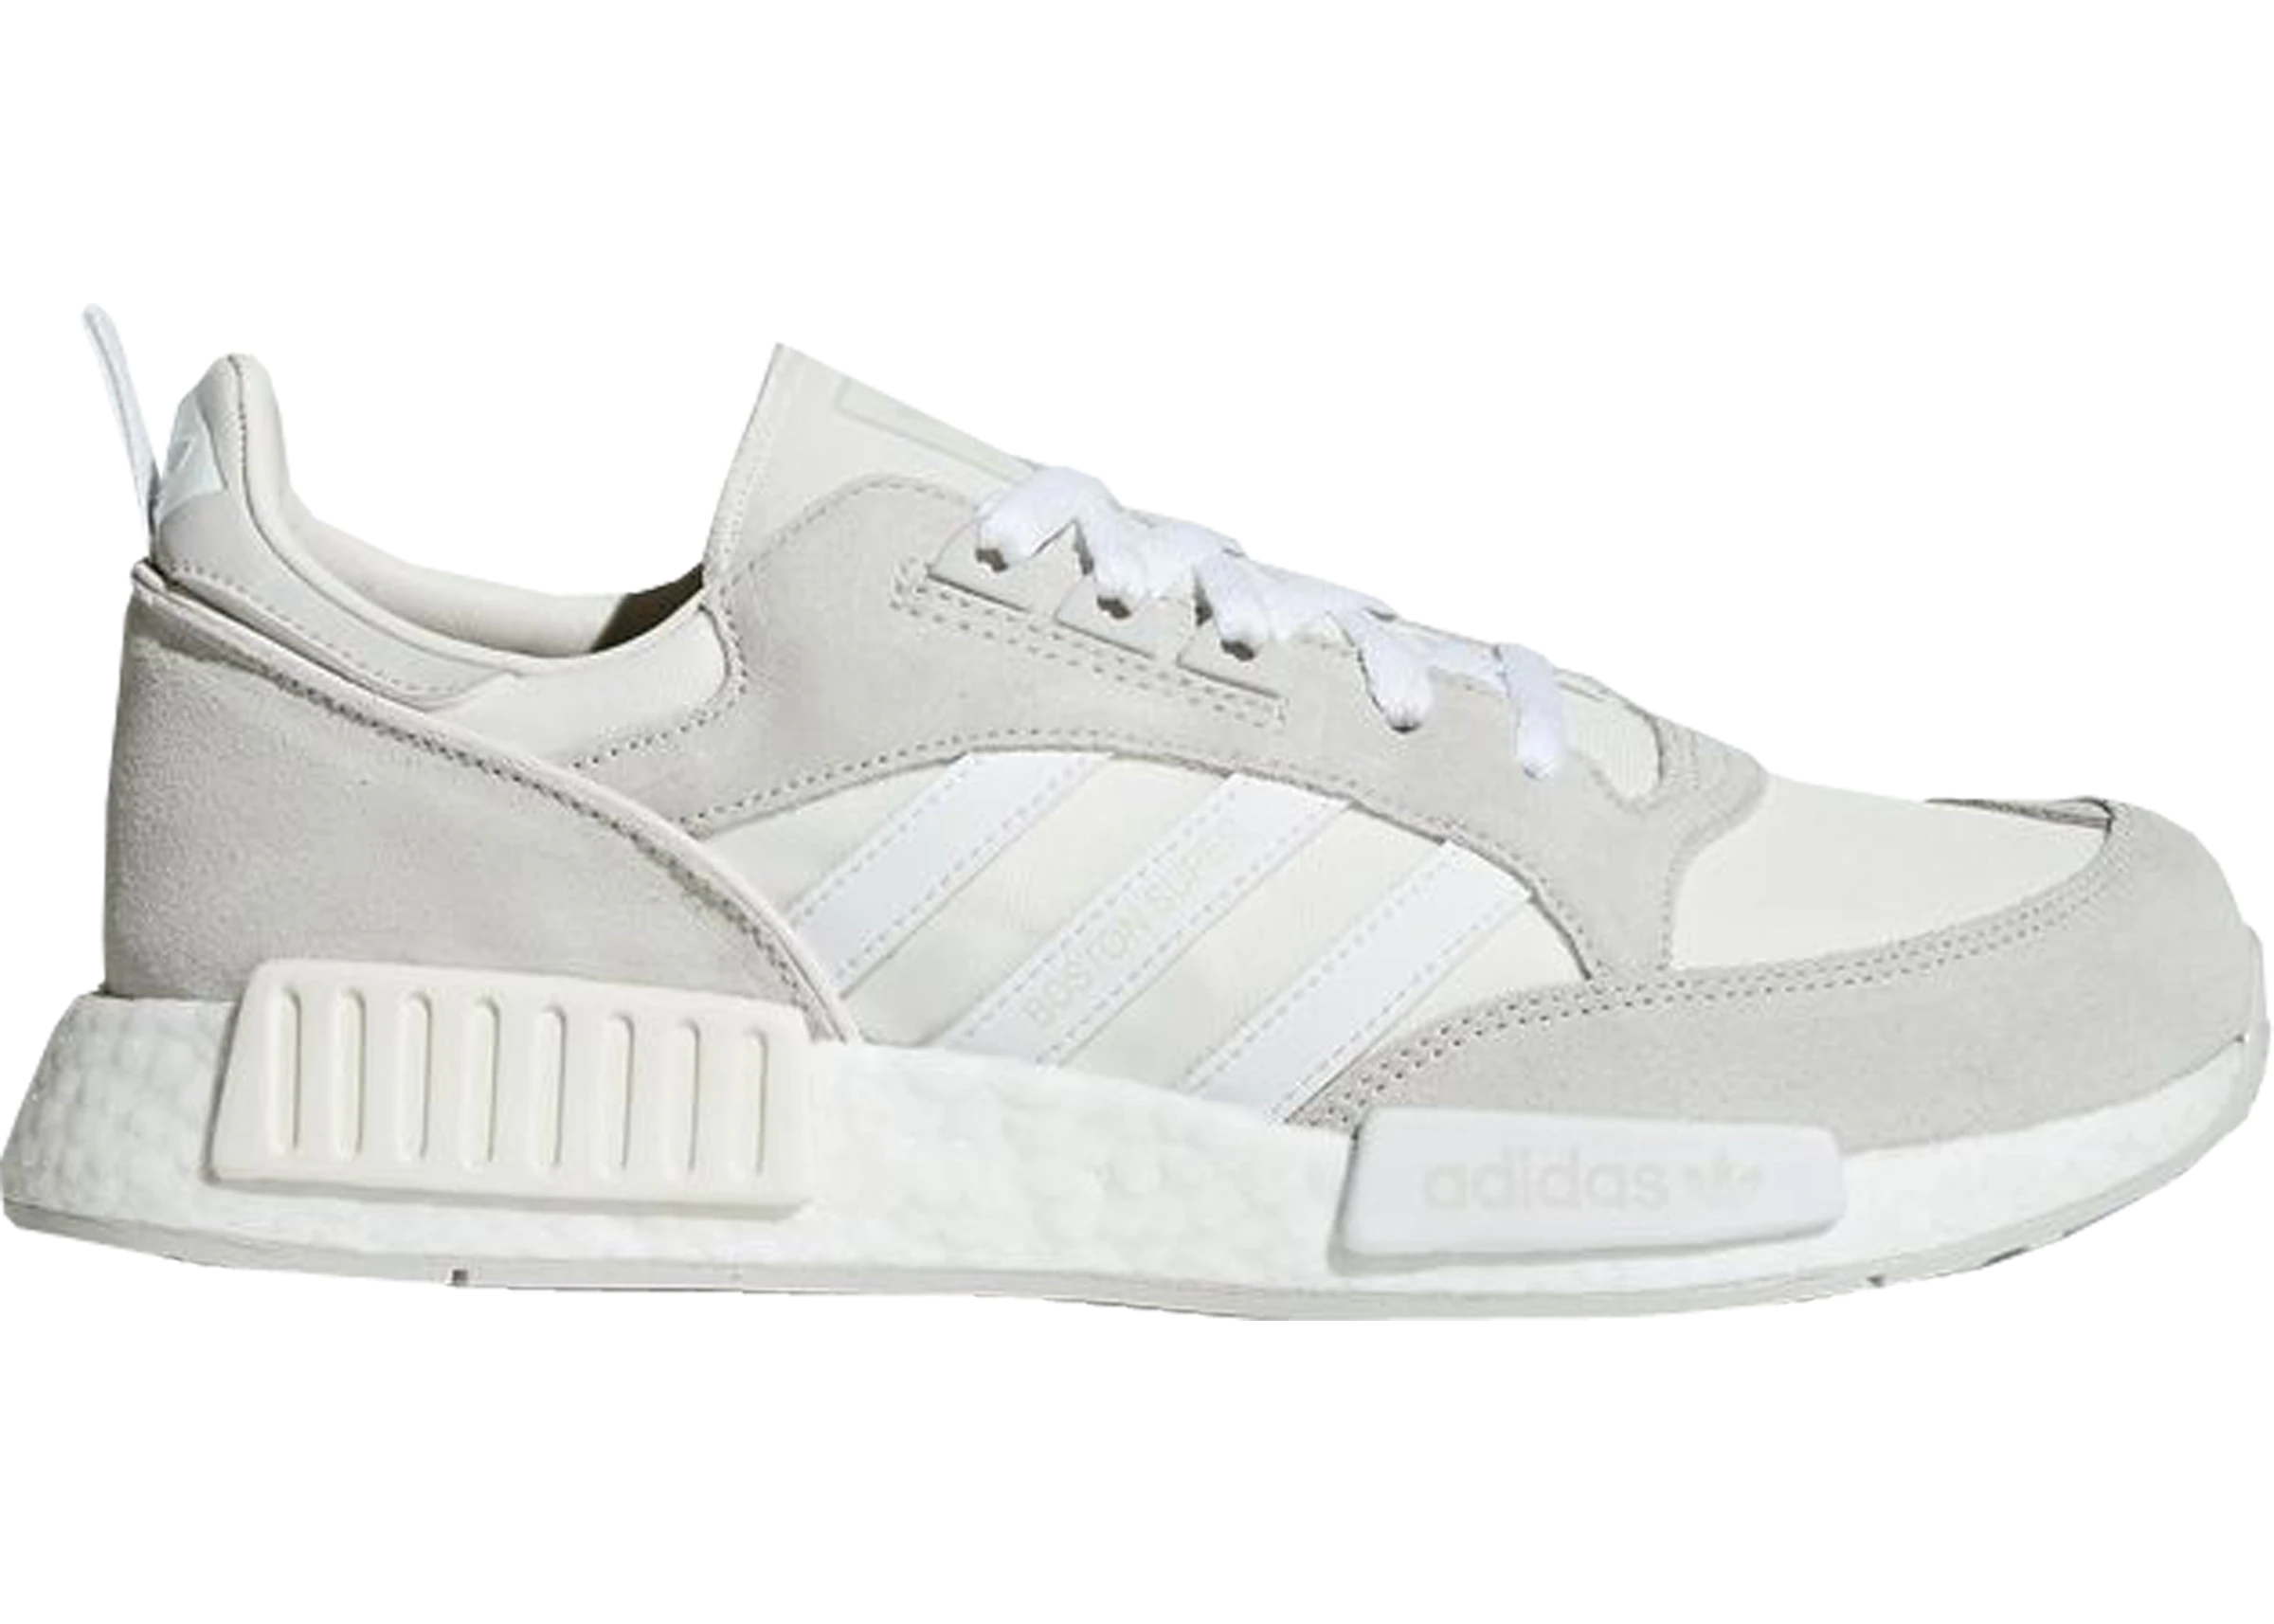 twelve Adaptive Clothes adidas Boston Super x R1 Never Made Pack Triple White - G27834 - US